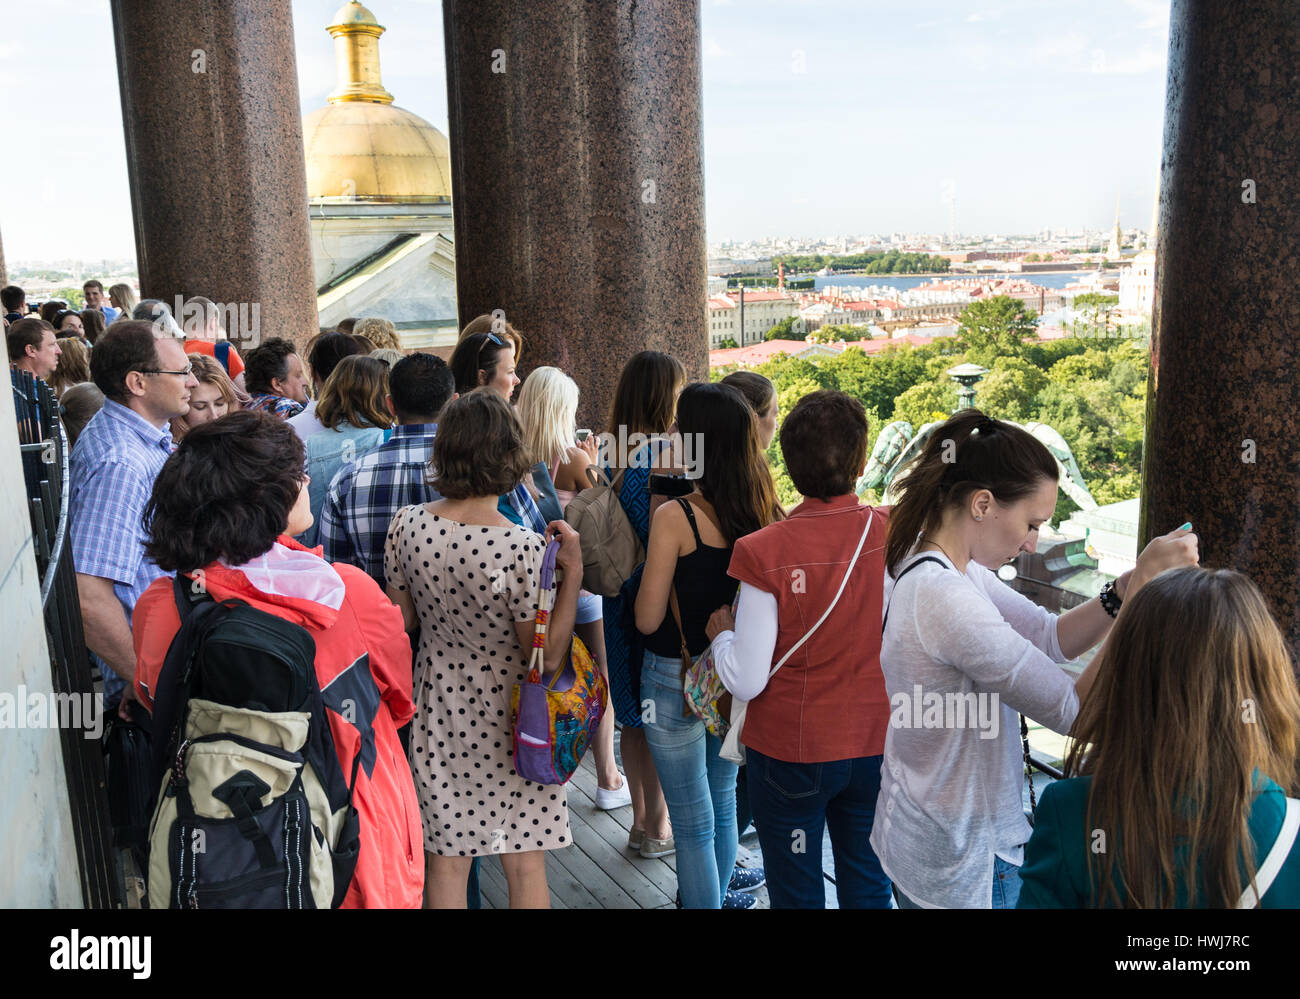 ST. PETERSBURG, RUSSIA - JULY 14, 2016: Tourists admire the view of St. Petersburg on the upper colonnade of St. Isaac's Cathedral Stock Photo